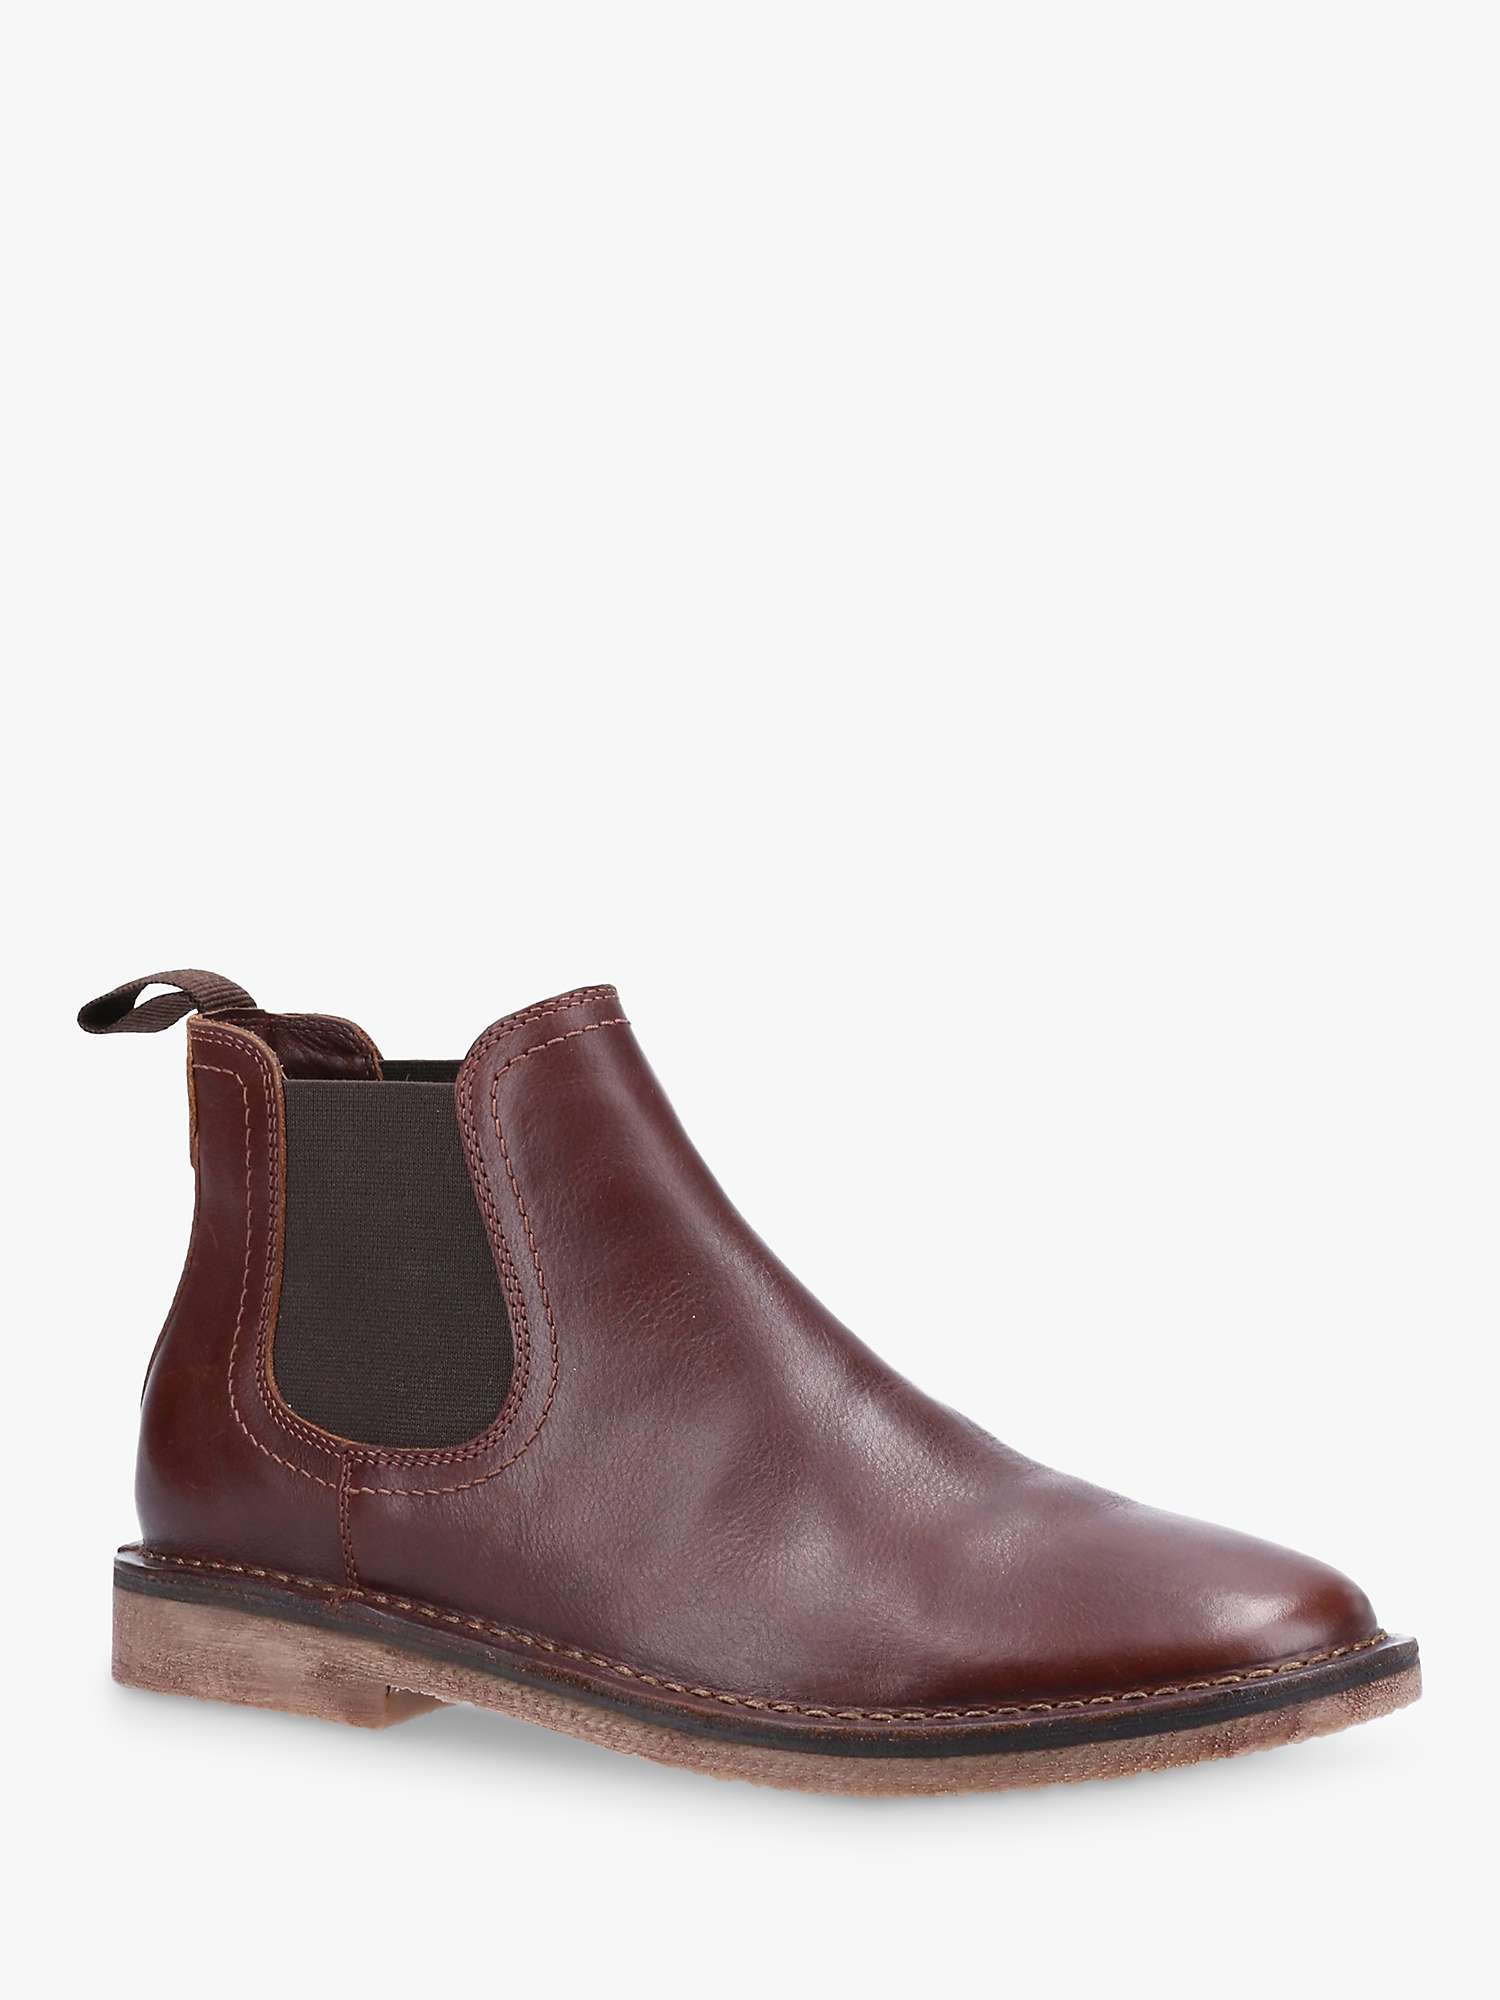 Hush Puppies Shaun Leather Chelsea Boots, Brown at John Lewis & Partners